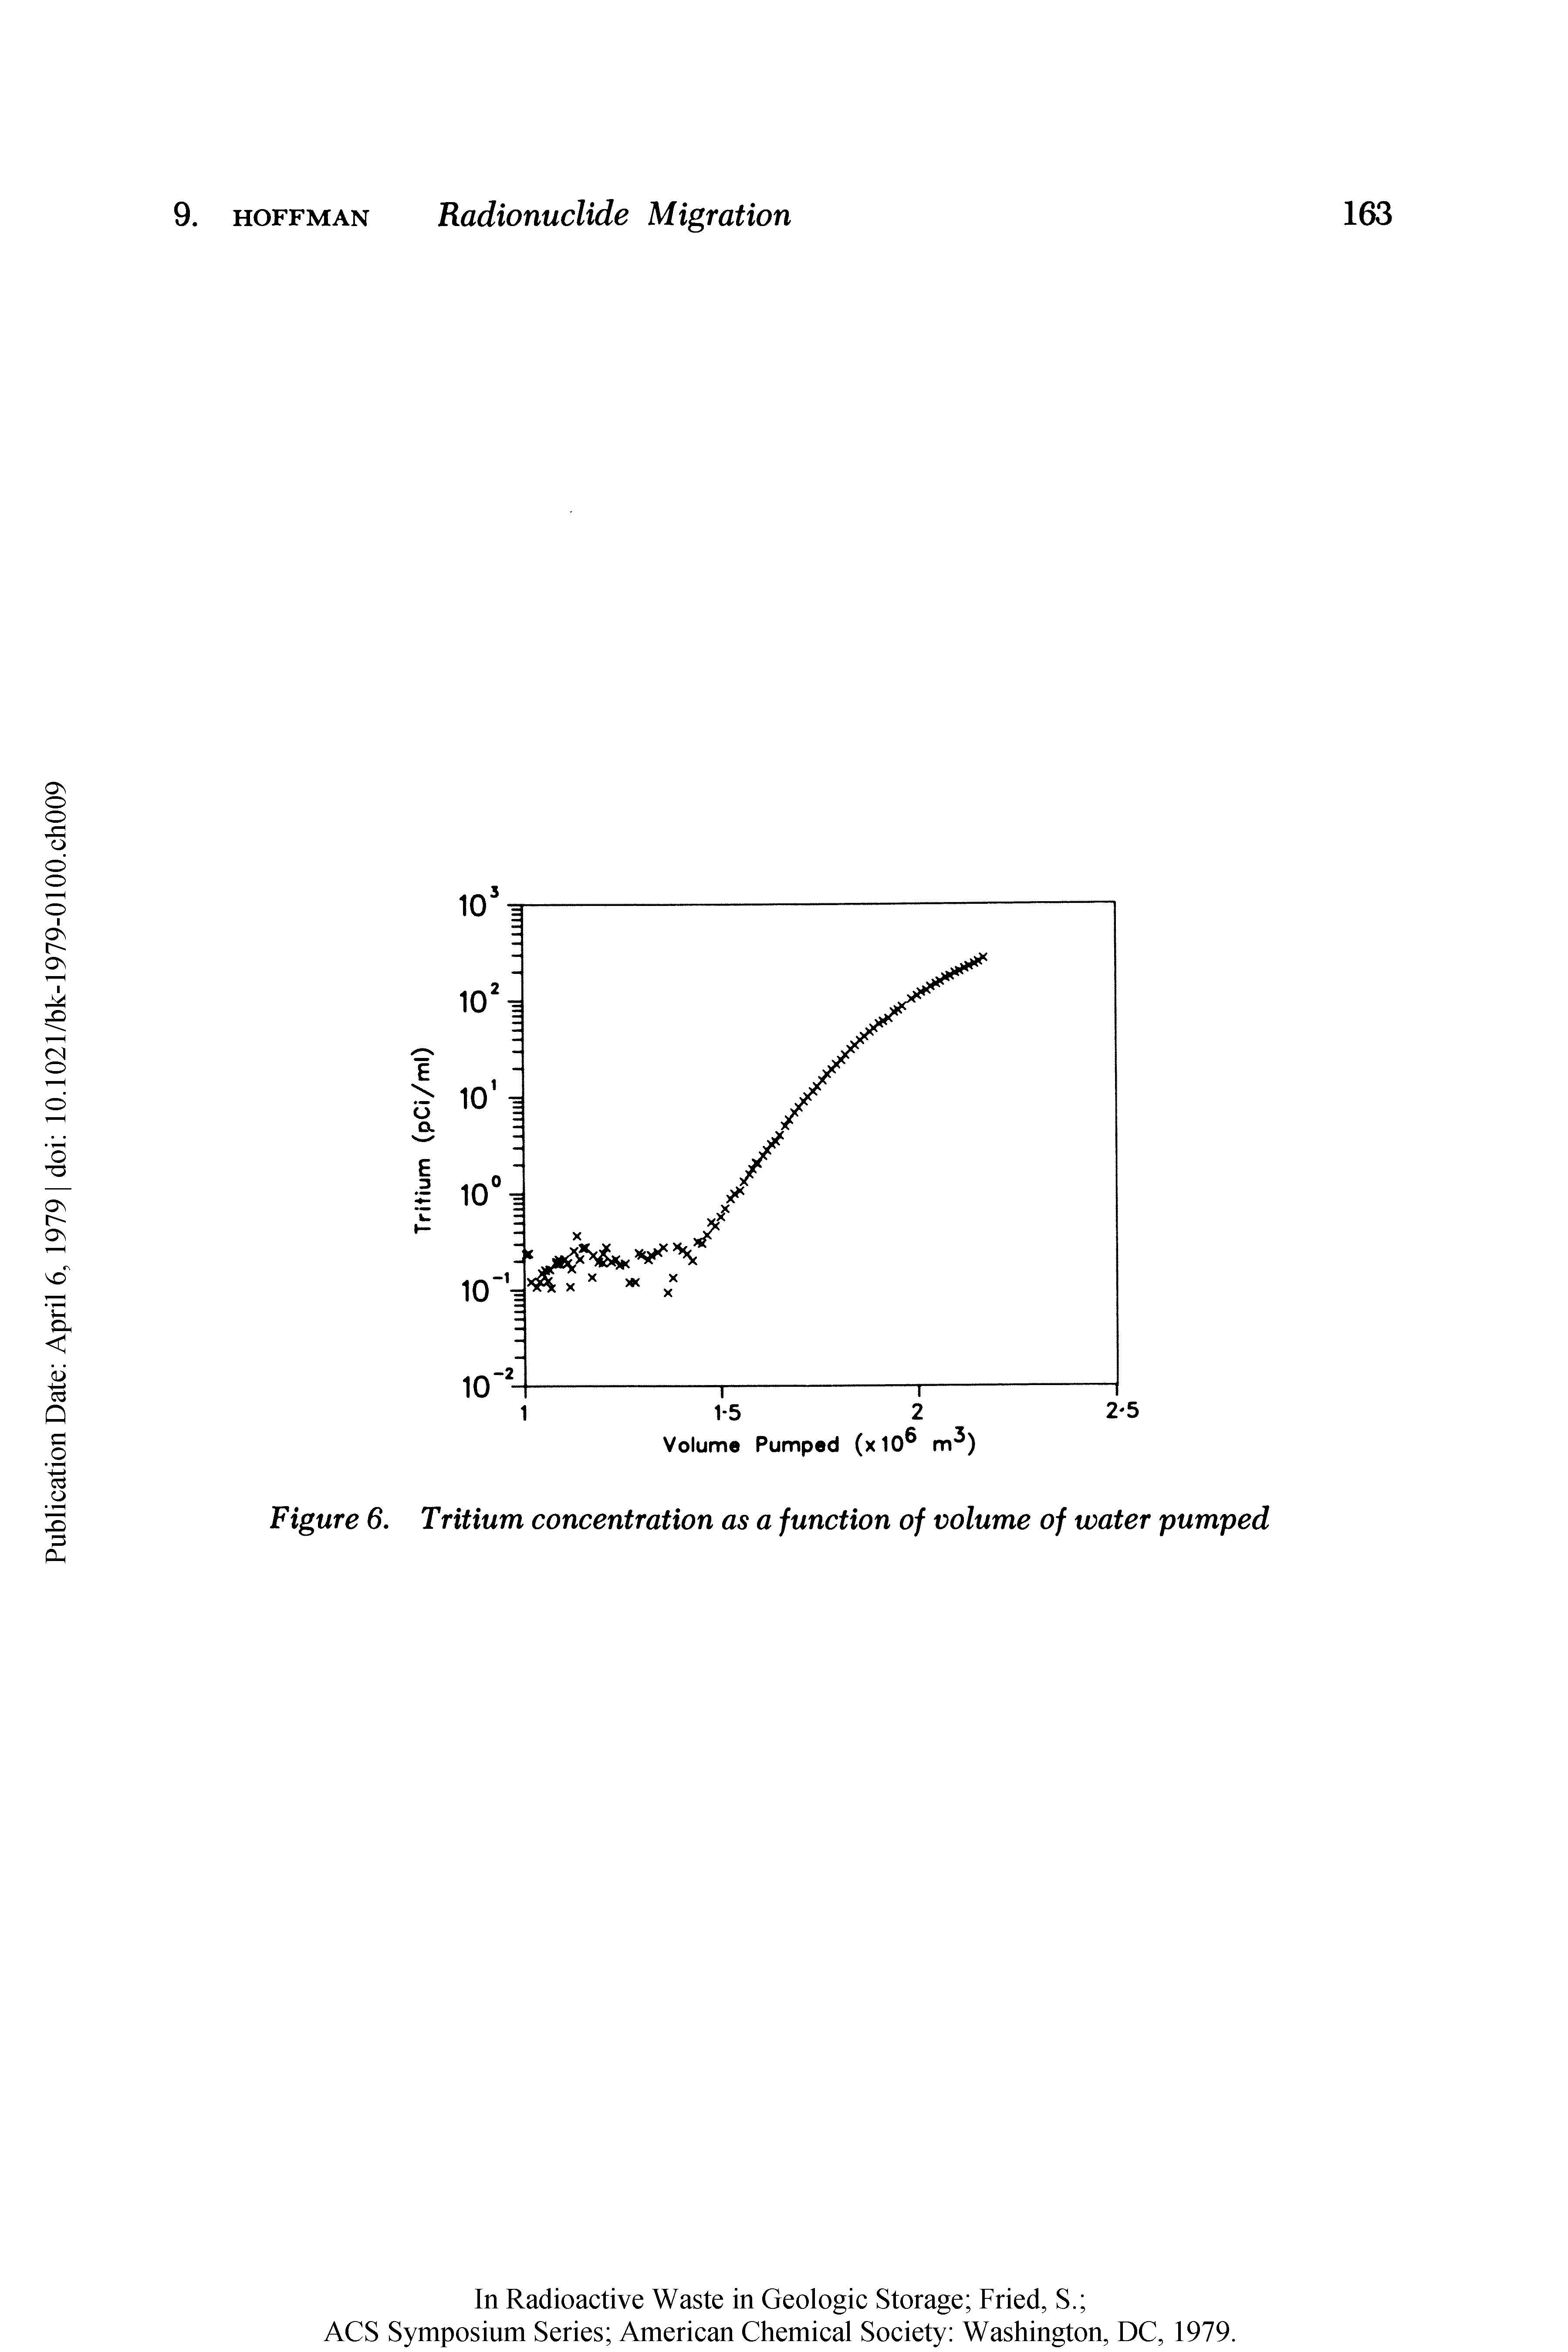 Figure 6. Tritium concentration as a function of volume of water pumped...